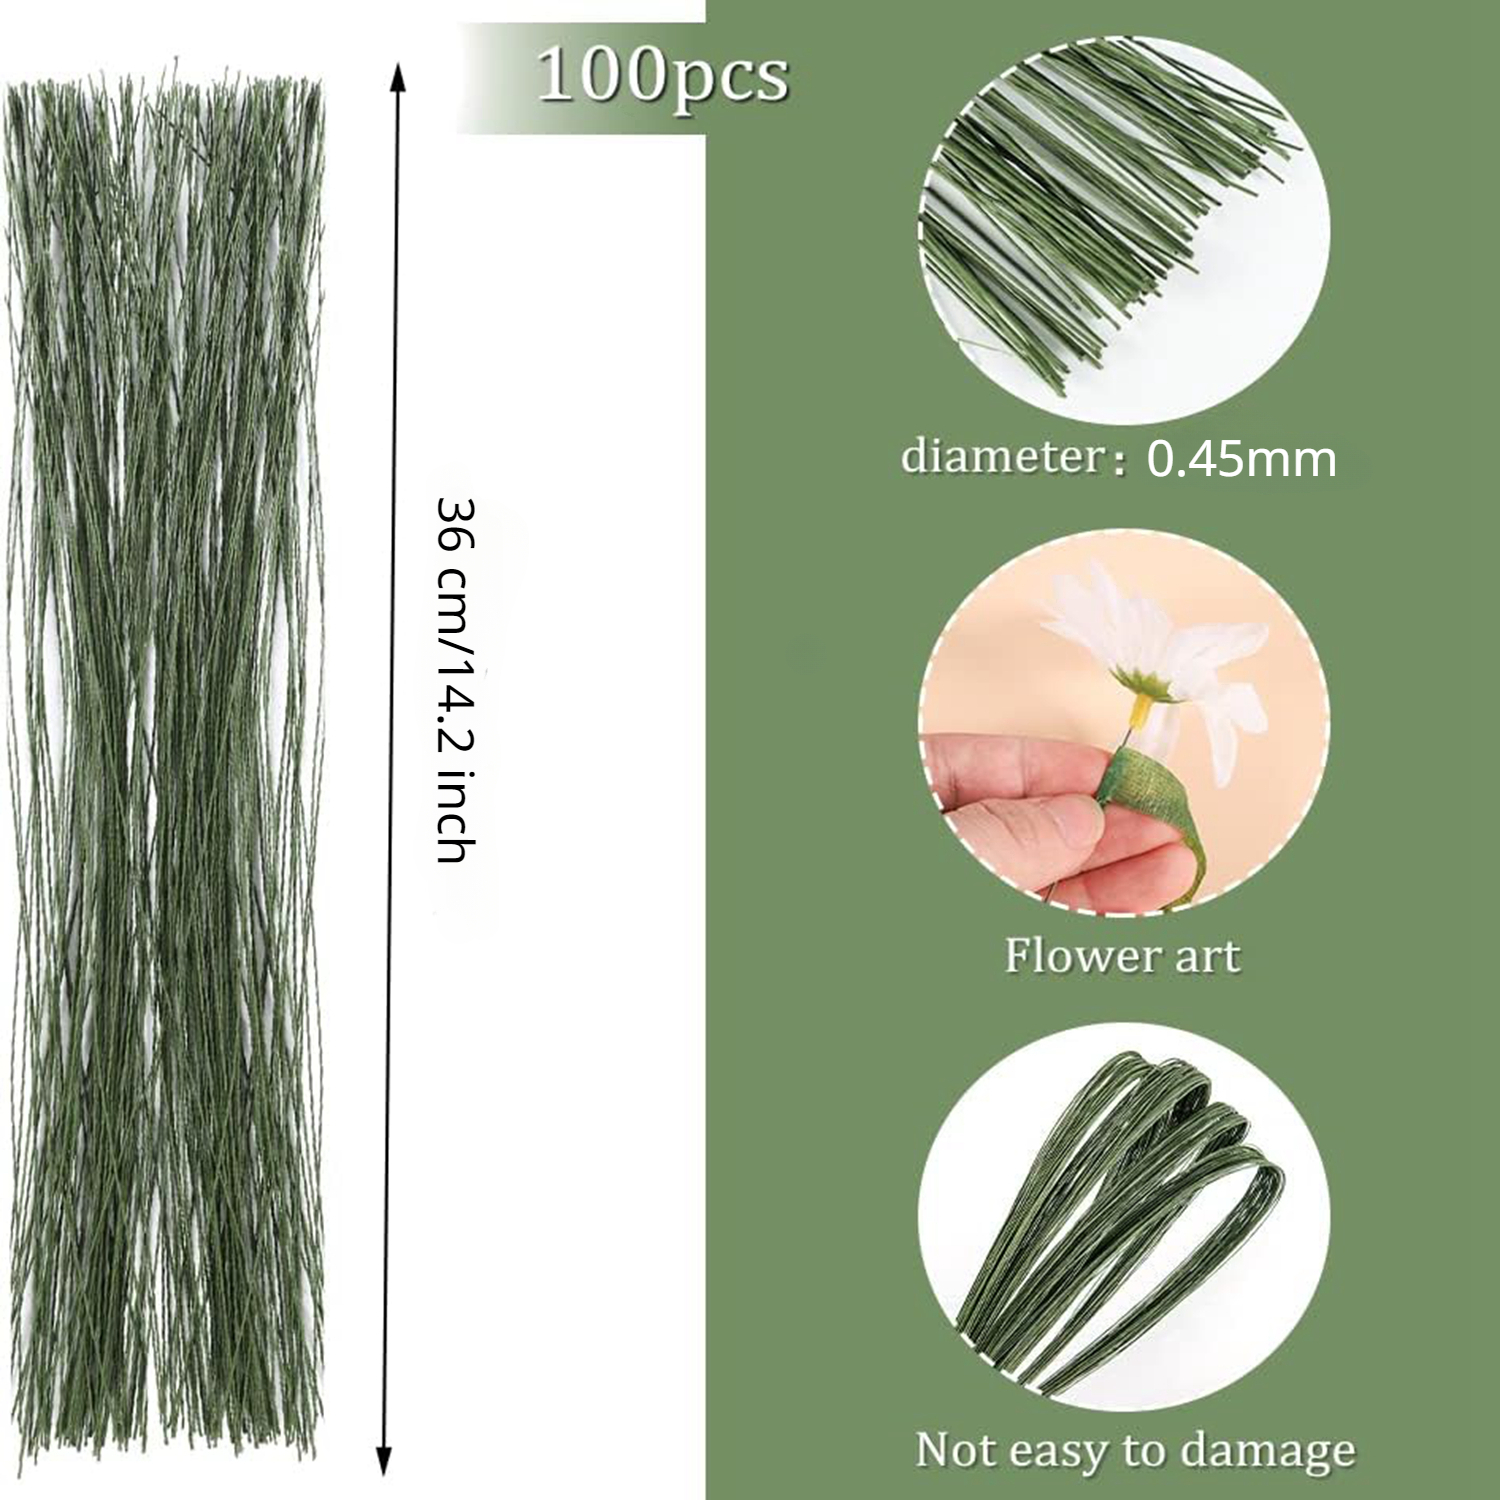 30pcs Floral Wire Stems Green Florist Wires Thick Floral Stem Wires with  Green Tape